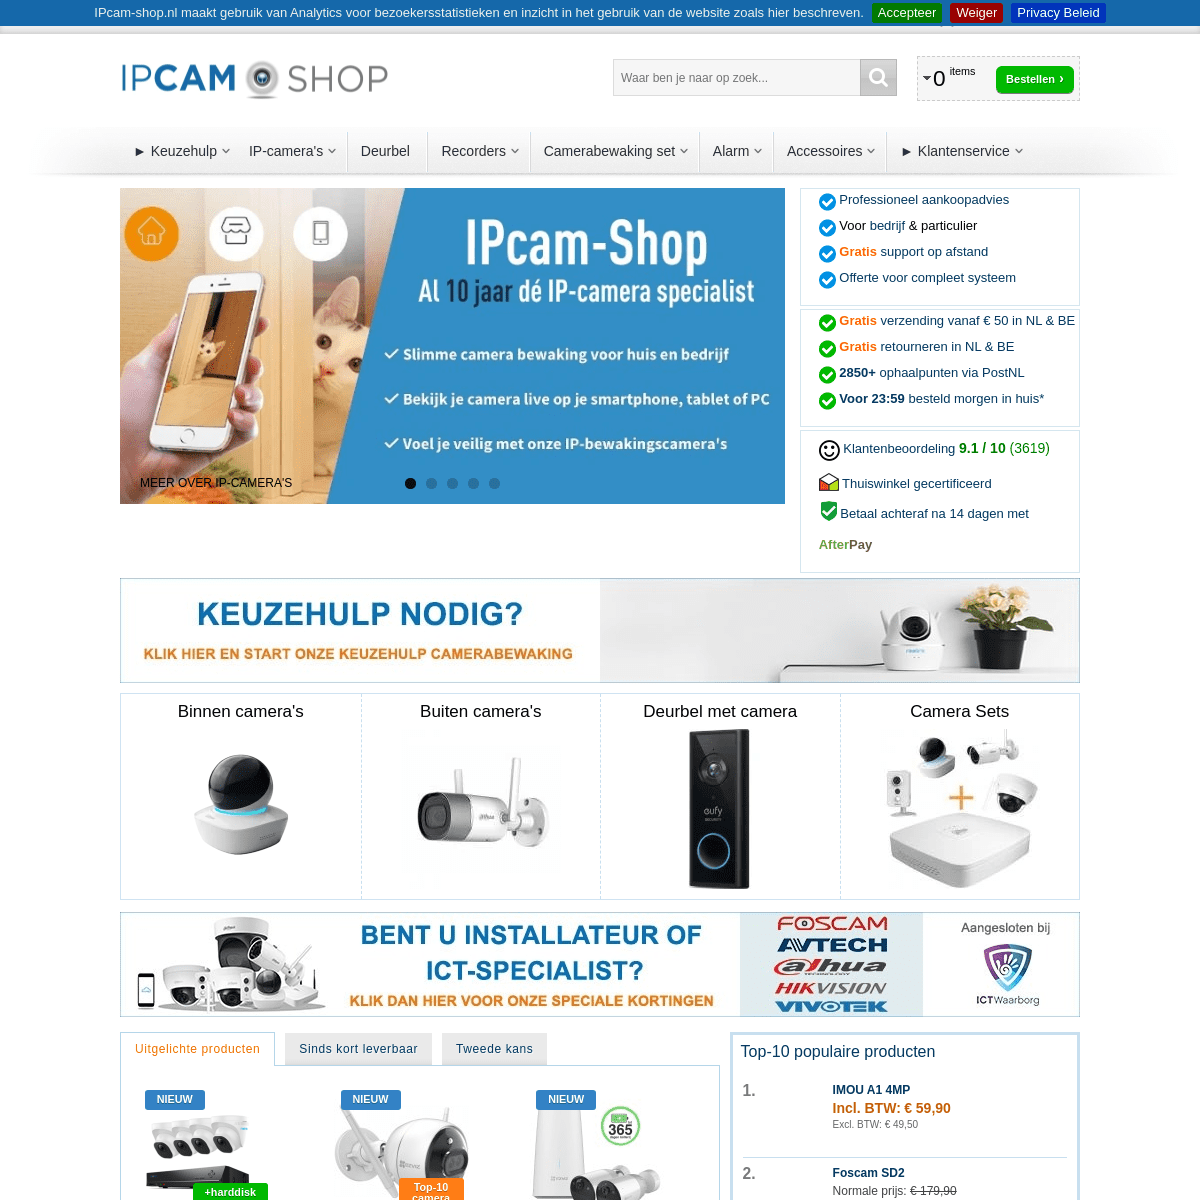 A complete backup of https://ipcam-shop.nl